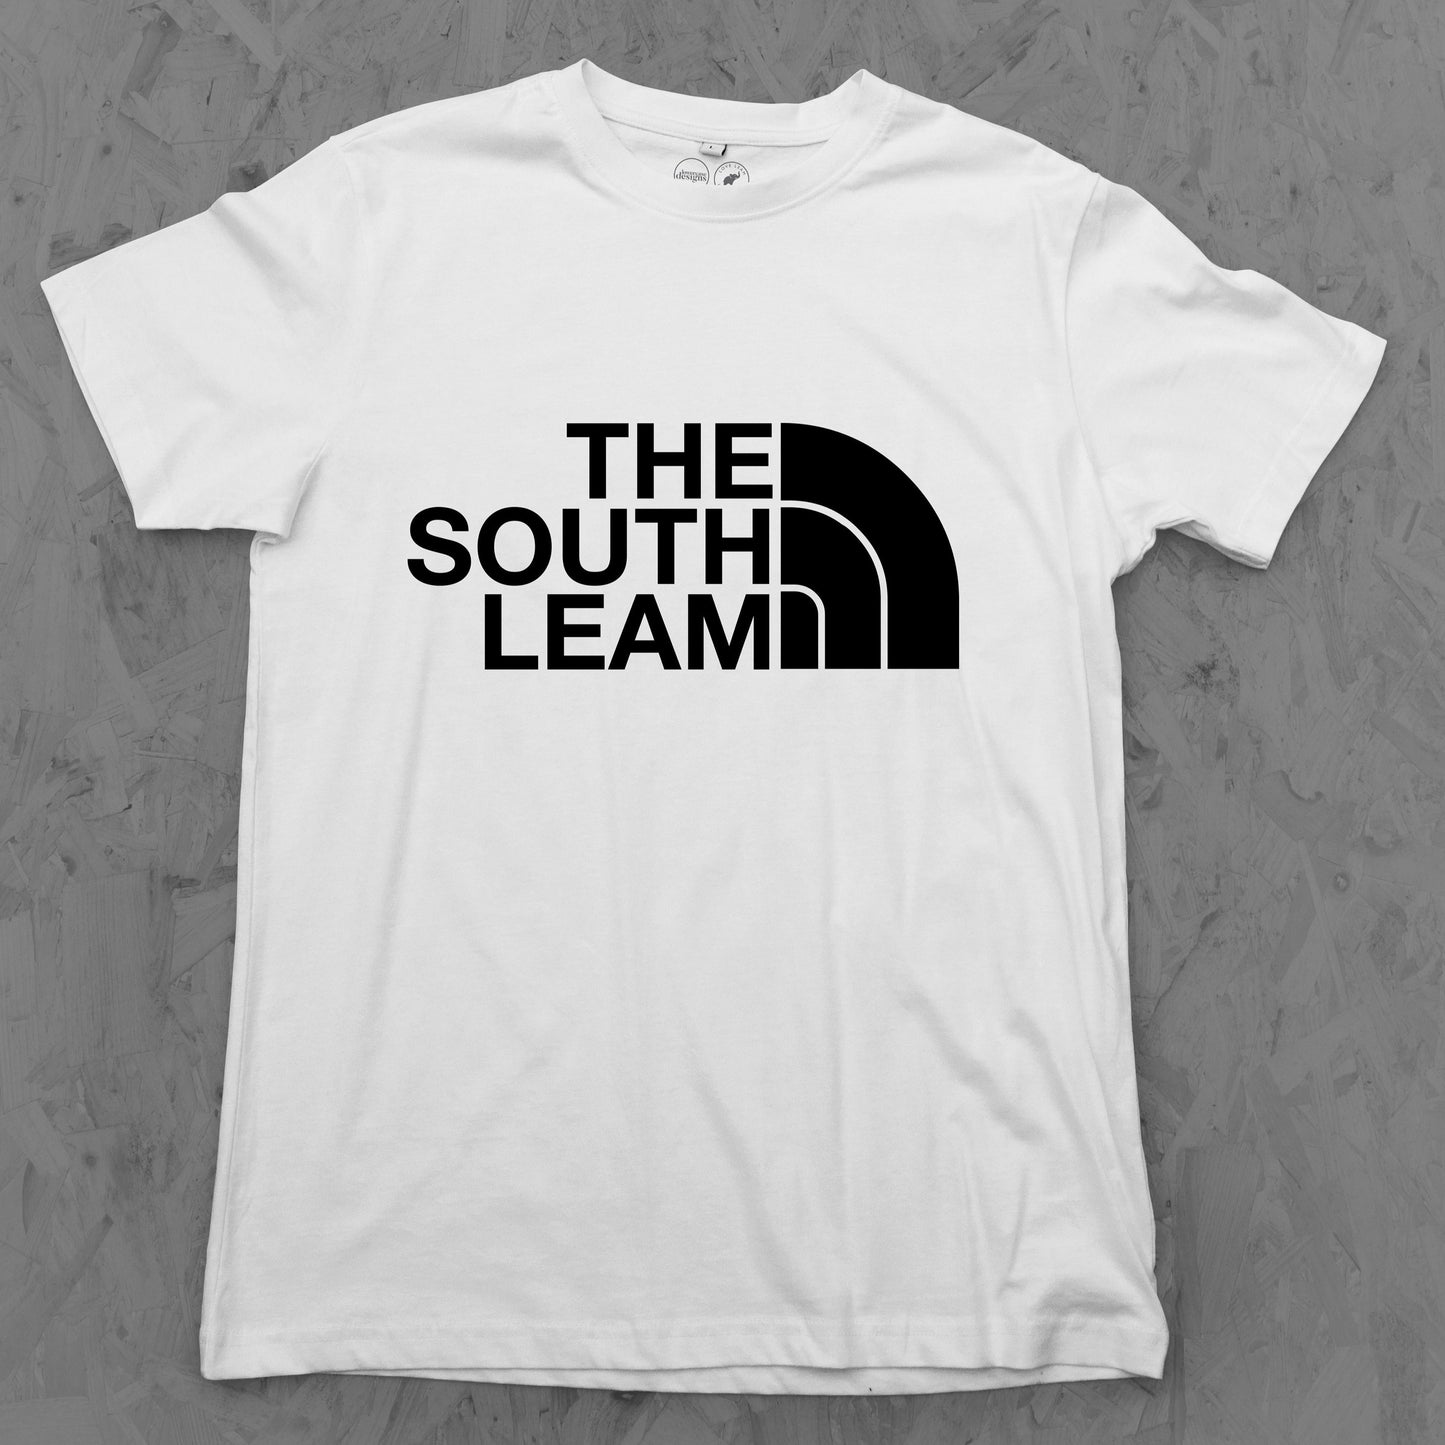 The South Leam Tee Child's sizes 3-14 years